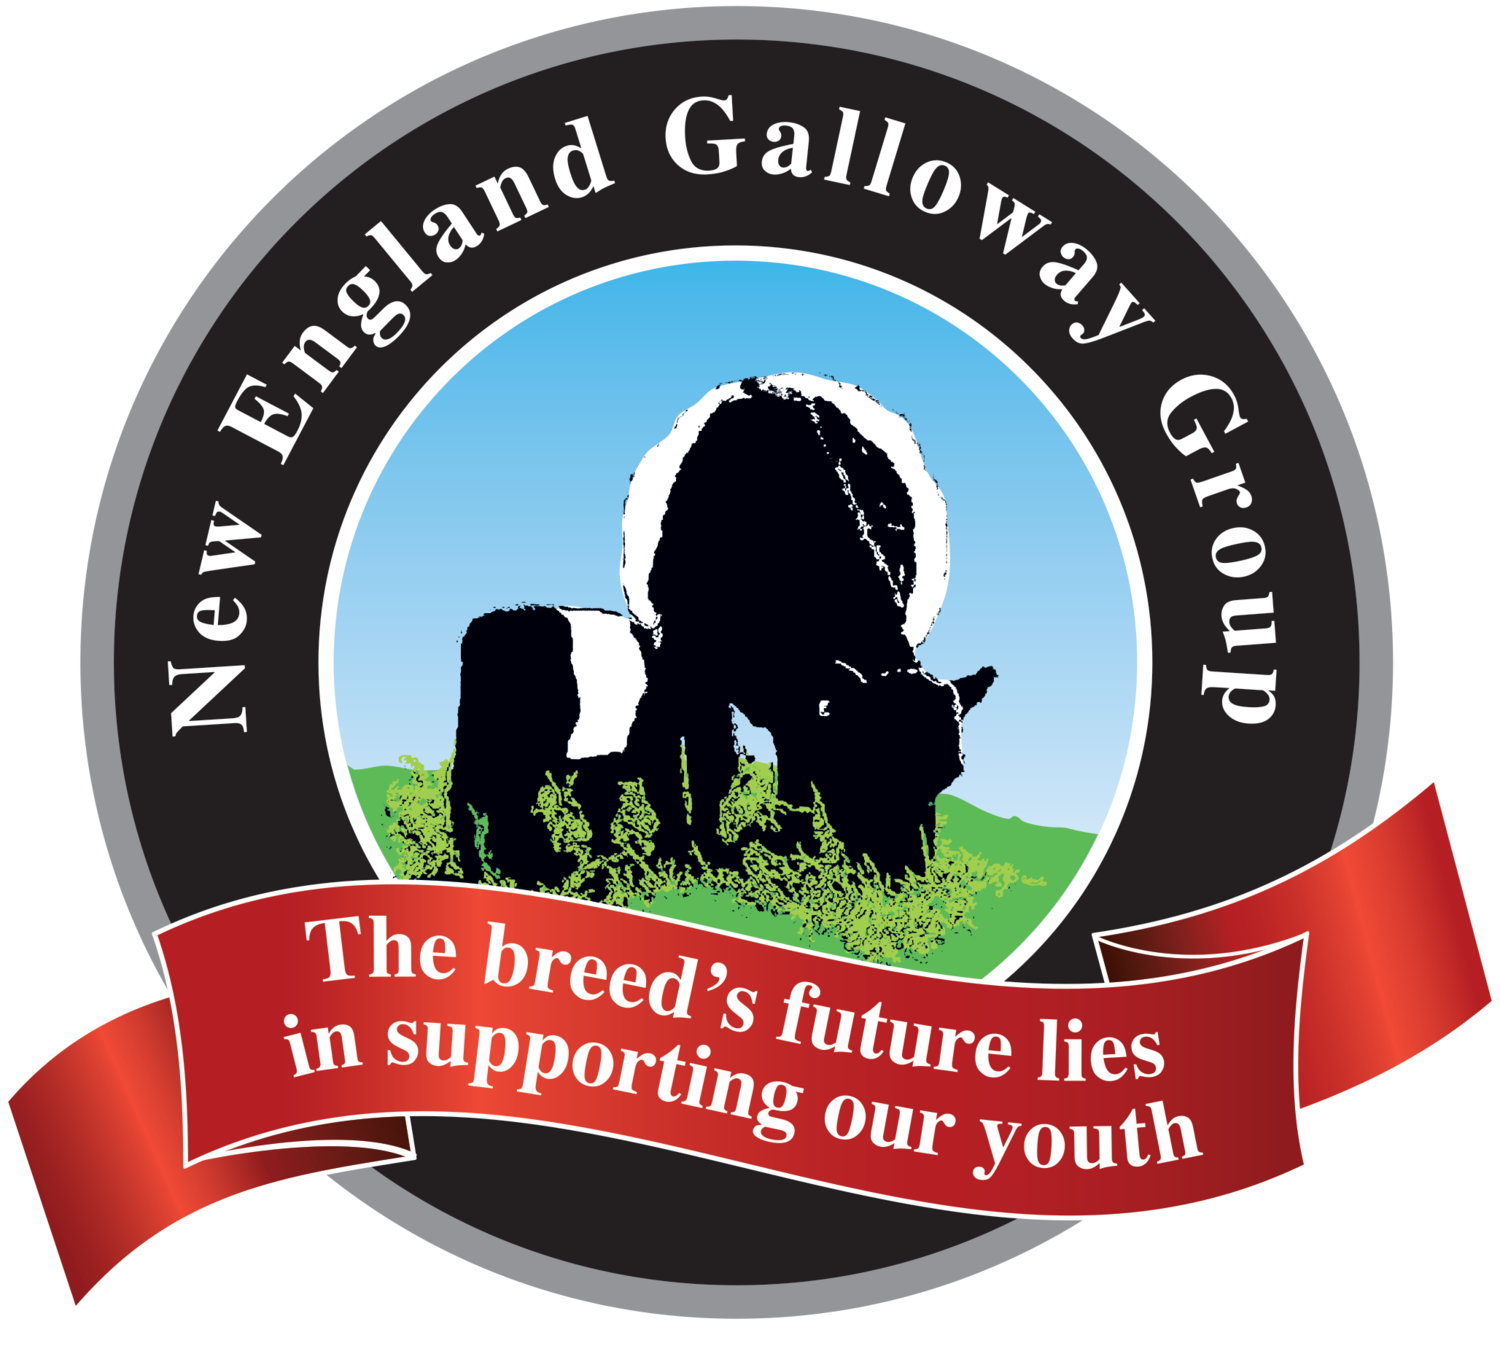 New England Galloway Group